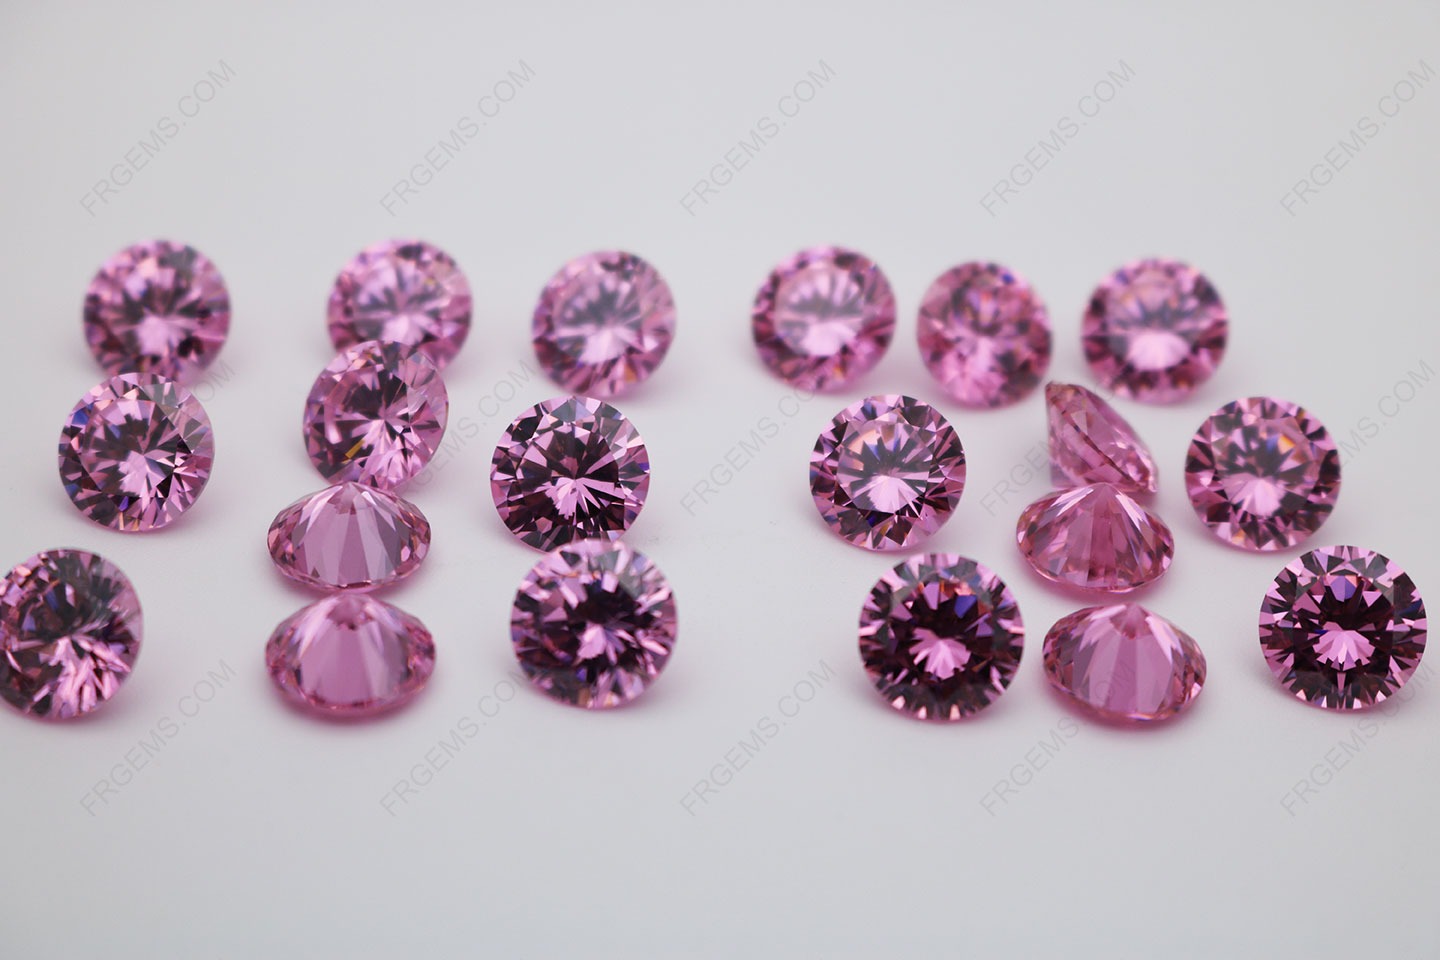 Cubic Zirconia Pink Round Shape diamond faceted cut 10mm stones Supplier CZ03 IMG_0159